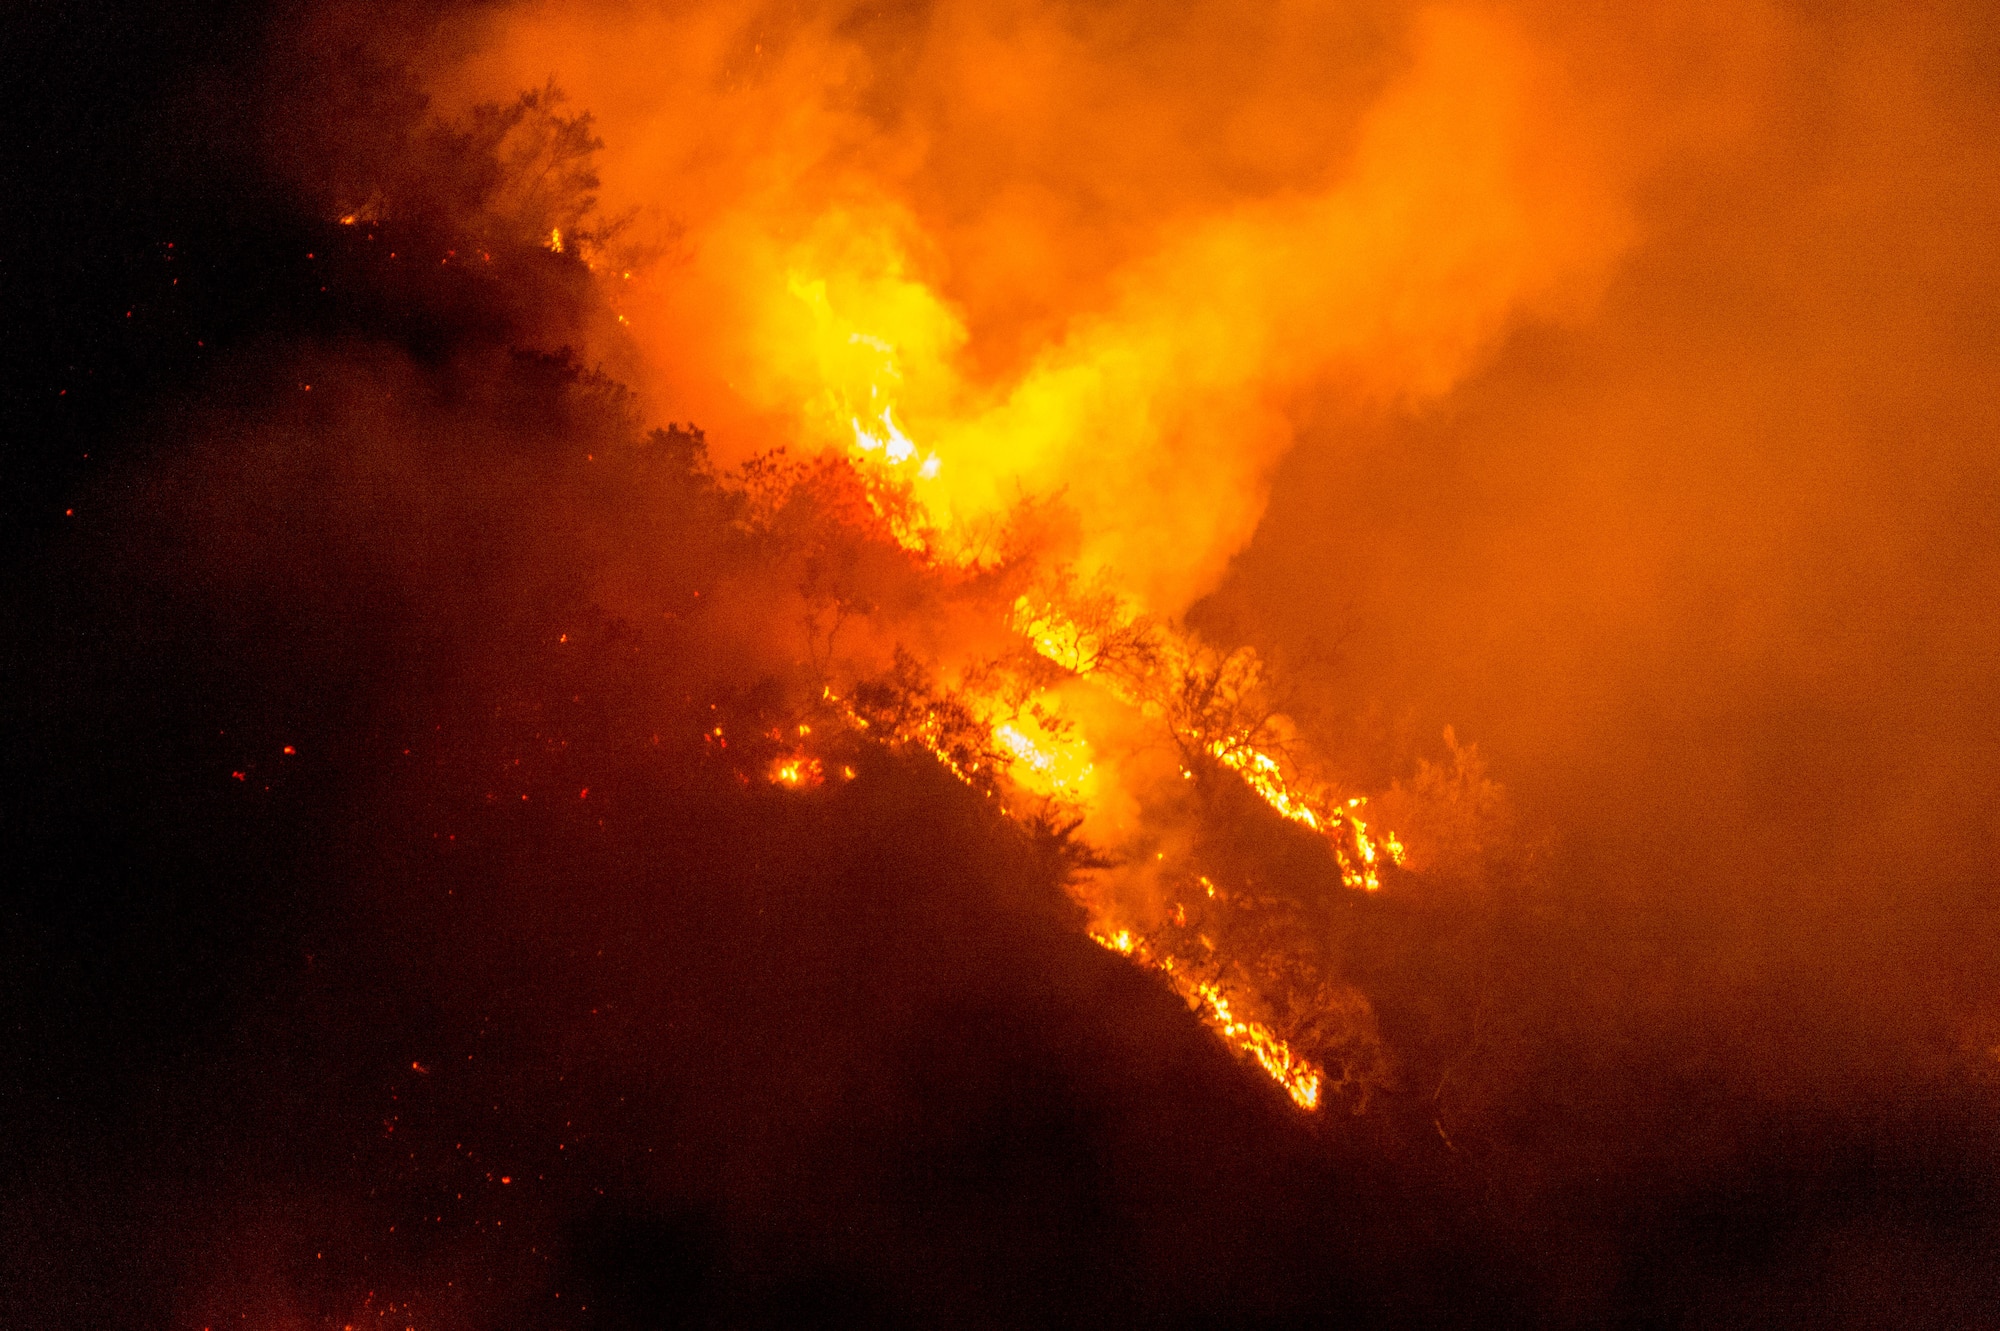 The Thomas Fire, named for the fire's point of origin near St. Thomas Aquinas College in Santa Paula, California, burns on a ridgeline in Santa Barbara County, Dec. 10, 2017. The fire, initially fanned by 80-mph Santa Ana winds, quickly spread across the Los Padres National Forest in Ventura and Santa Barbara counties. (U.S. Air Force photo by J.M. Eddins Jr.)